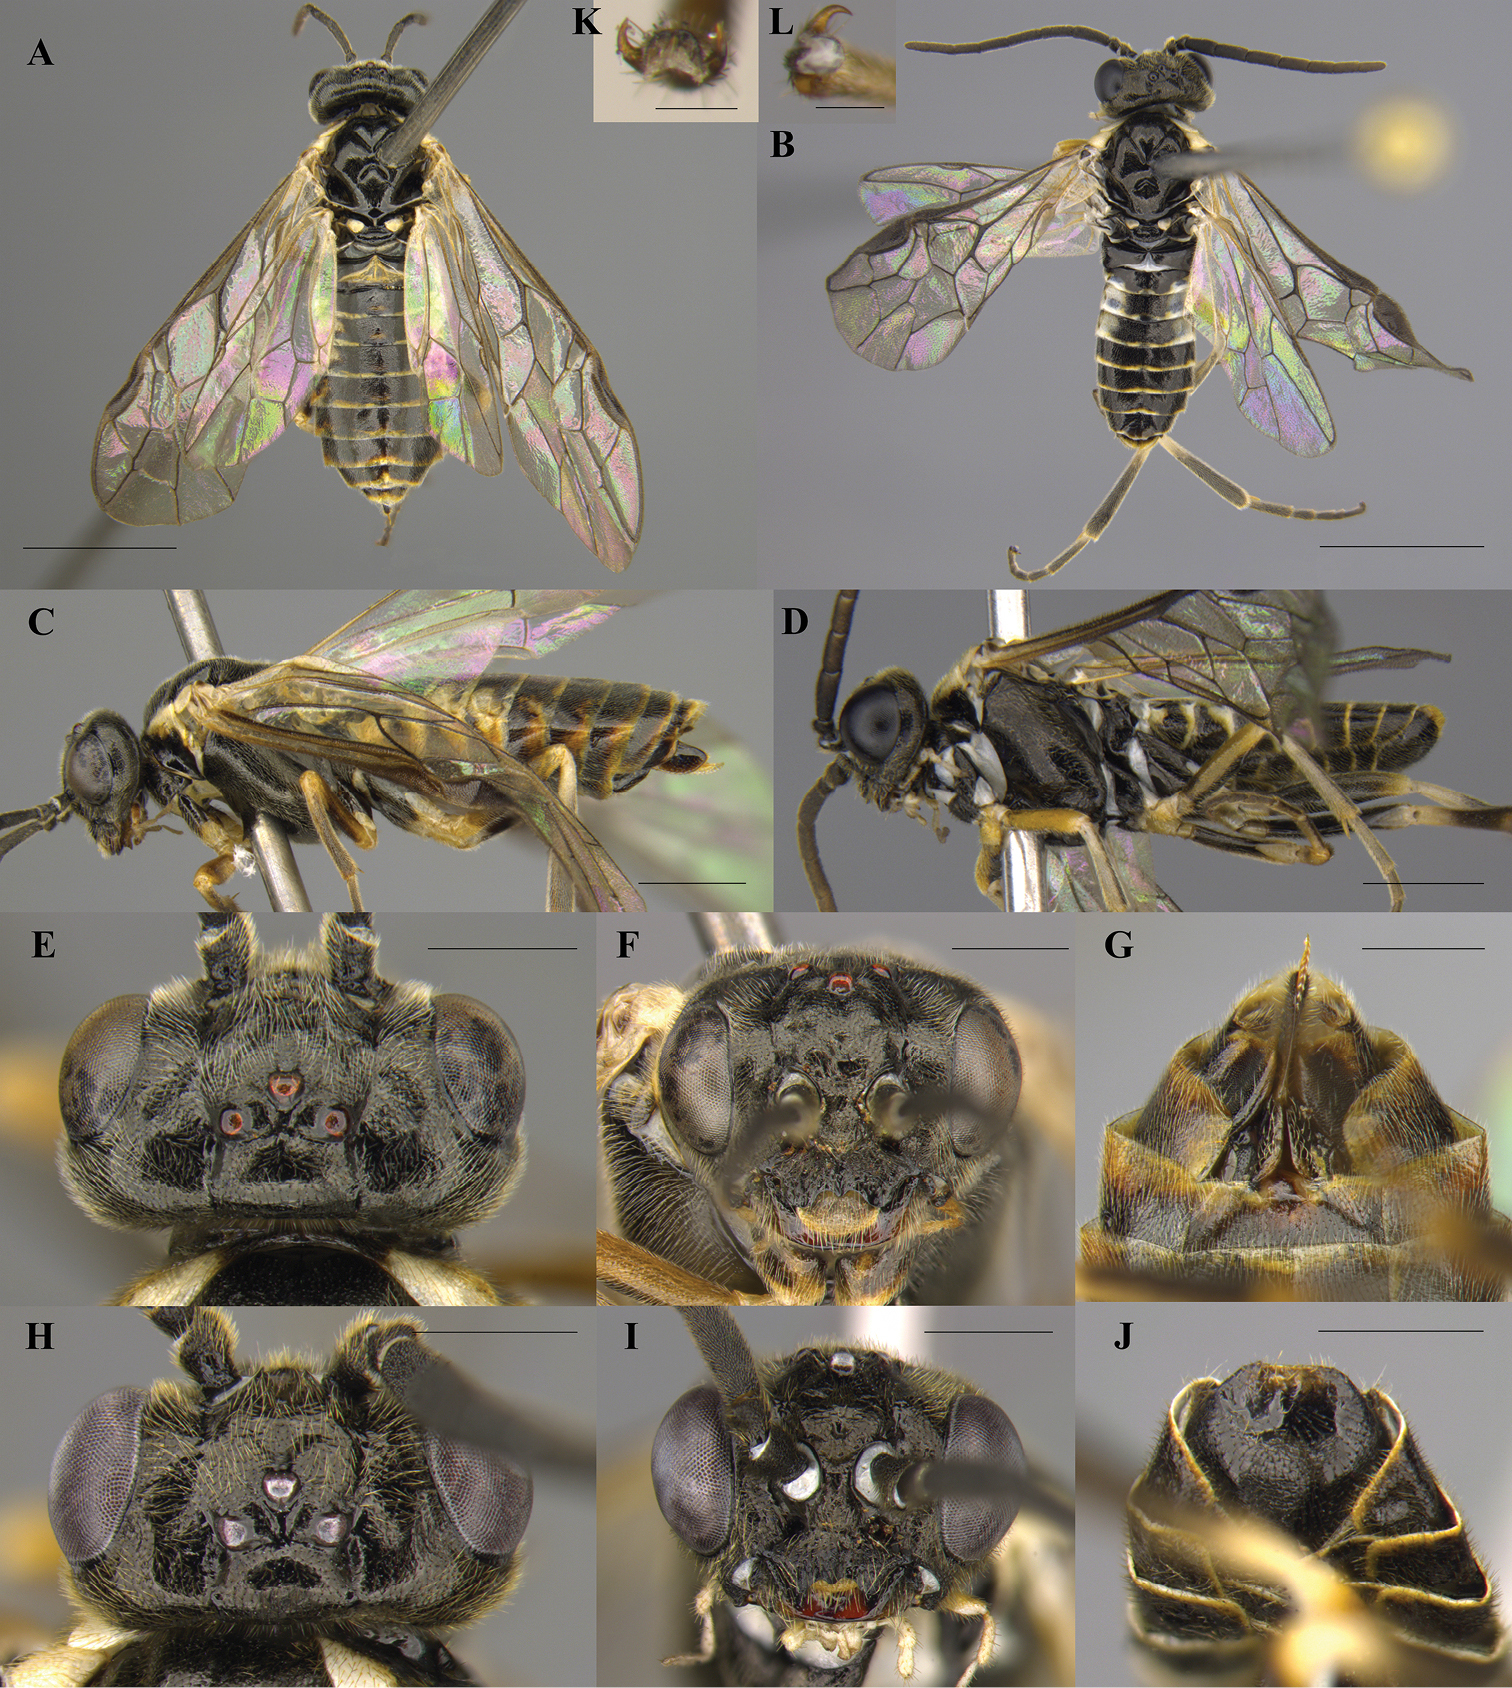 Taxonomic Review Of The Genus Empria Lepeletier Serville Hymenoptera Tenthredinidae In South Korea Morphological And Molecular Identification Of Two New Species